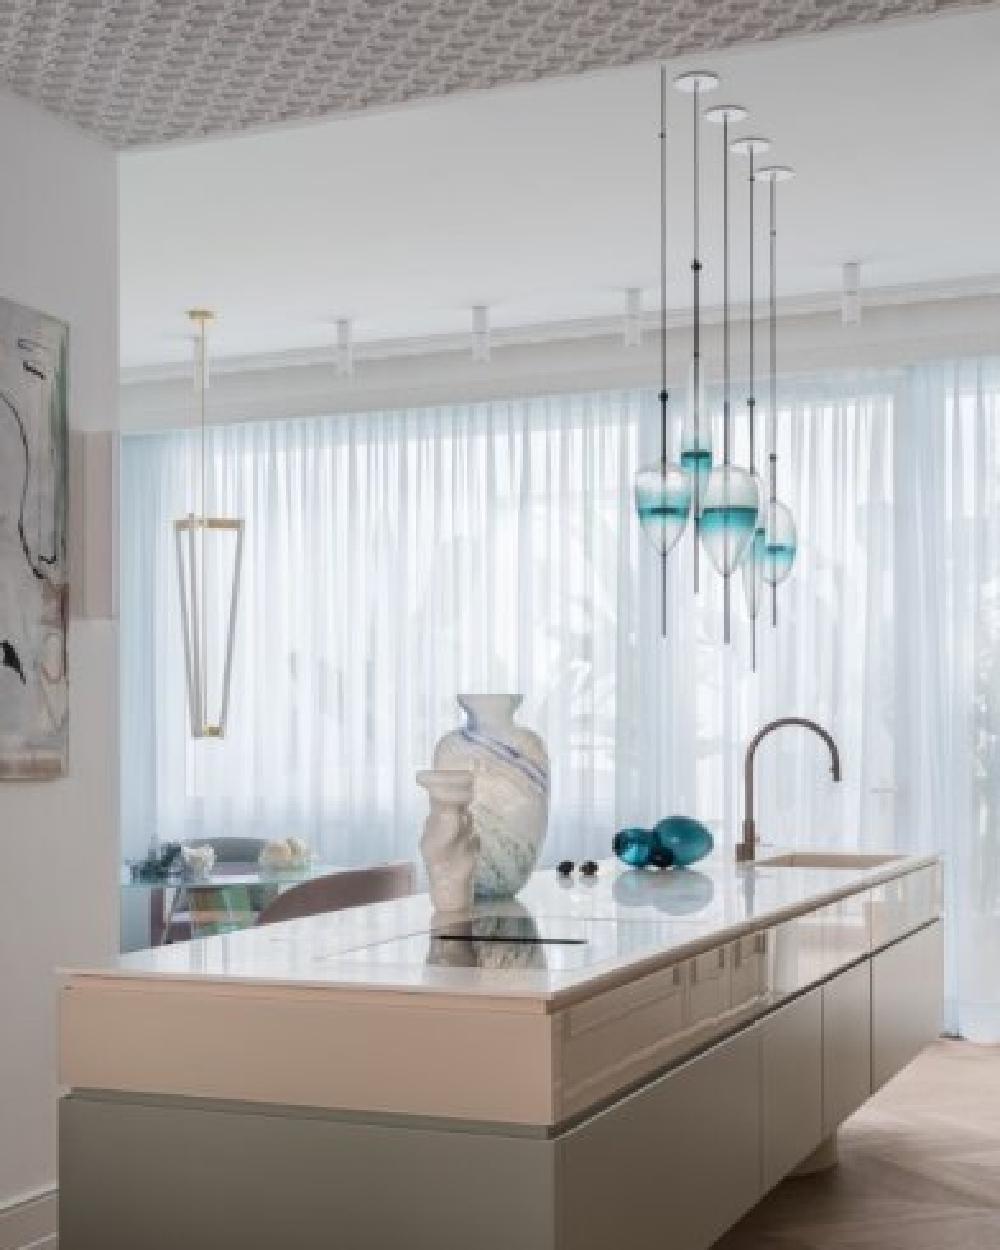 FLOW[T] S5 Pendant lamp in White by Nao Tamura for Wonderglass For Sale 1